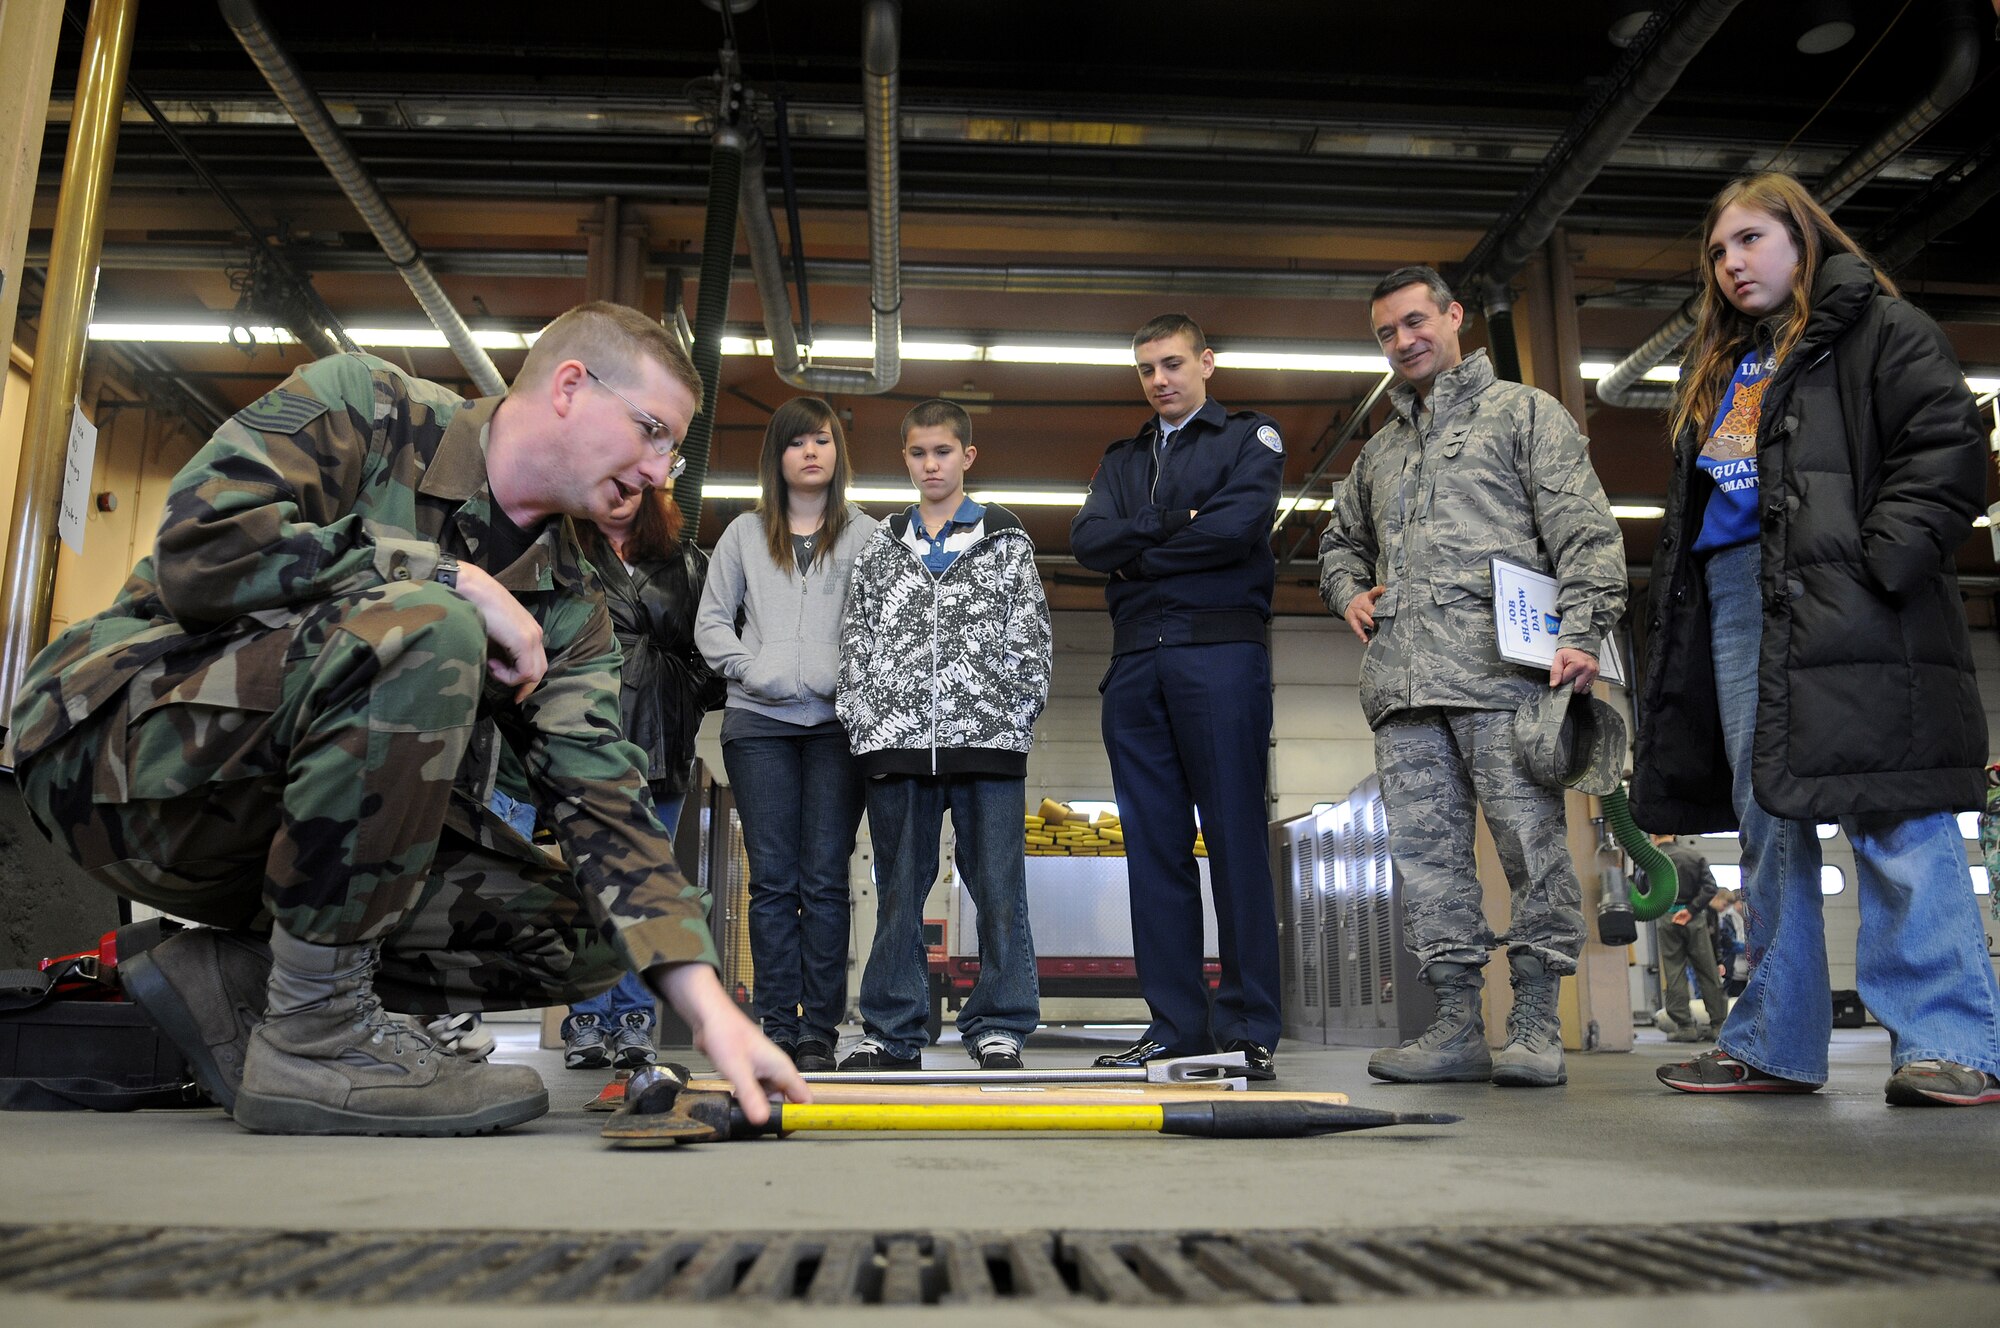 During job shadow day, children experience different career fields in the Air Force including firefighters, commanders and more Feb. 5, 2009, at Ramstein Air Base. (U.S. Air Force photo by Airman 1st Class Grovert Fuentes-Contreras)